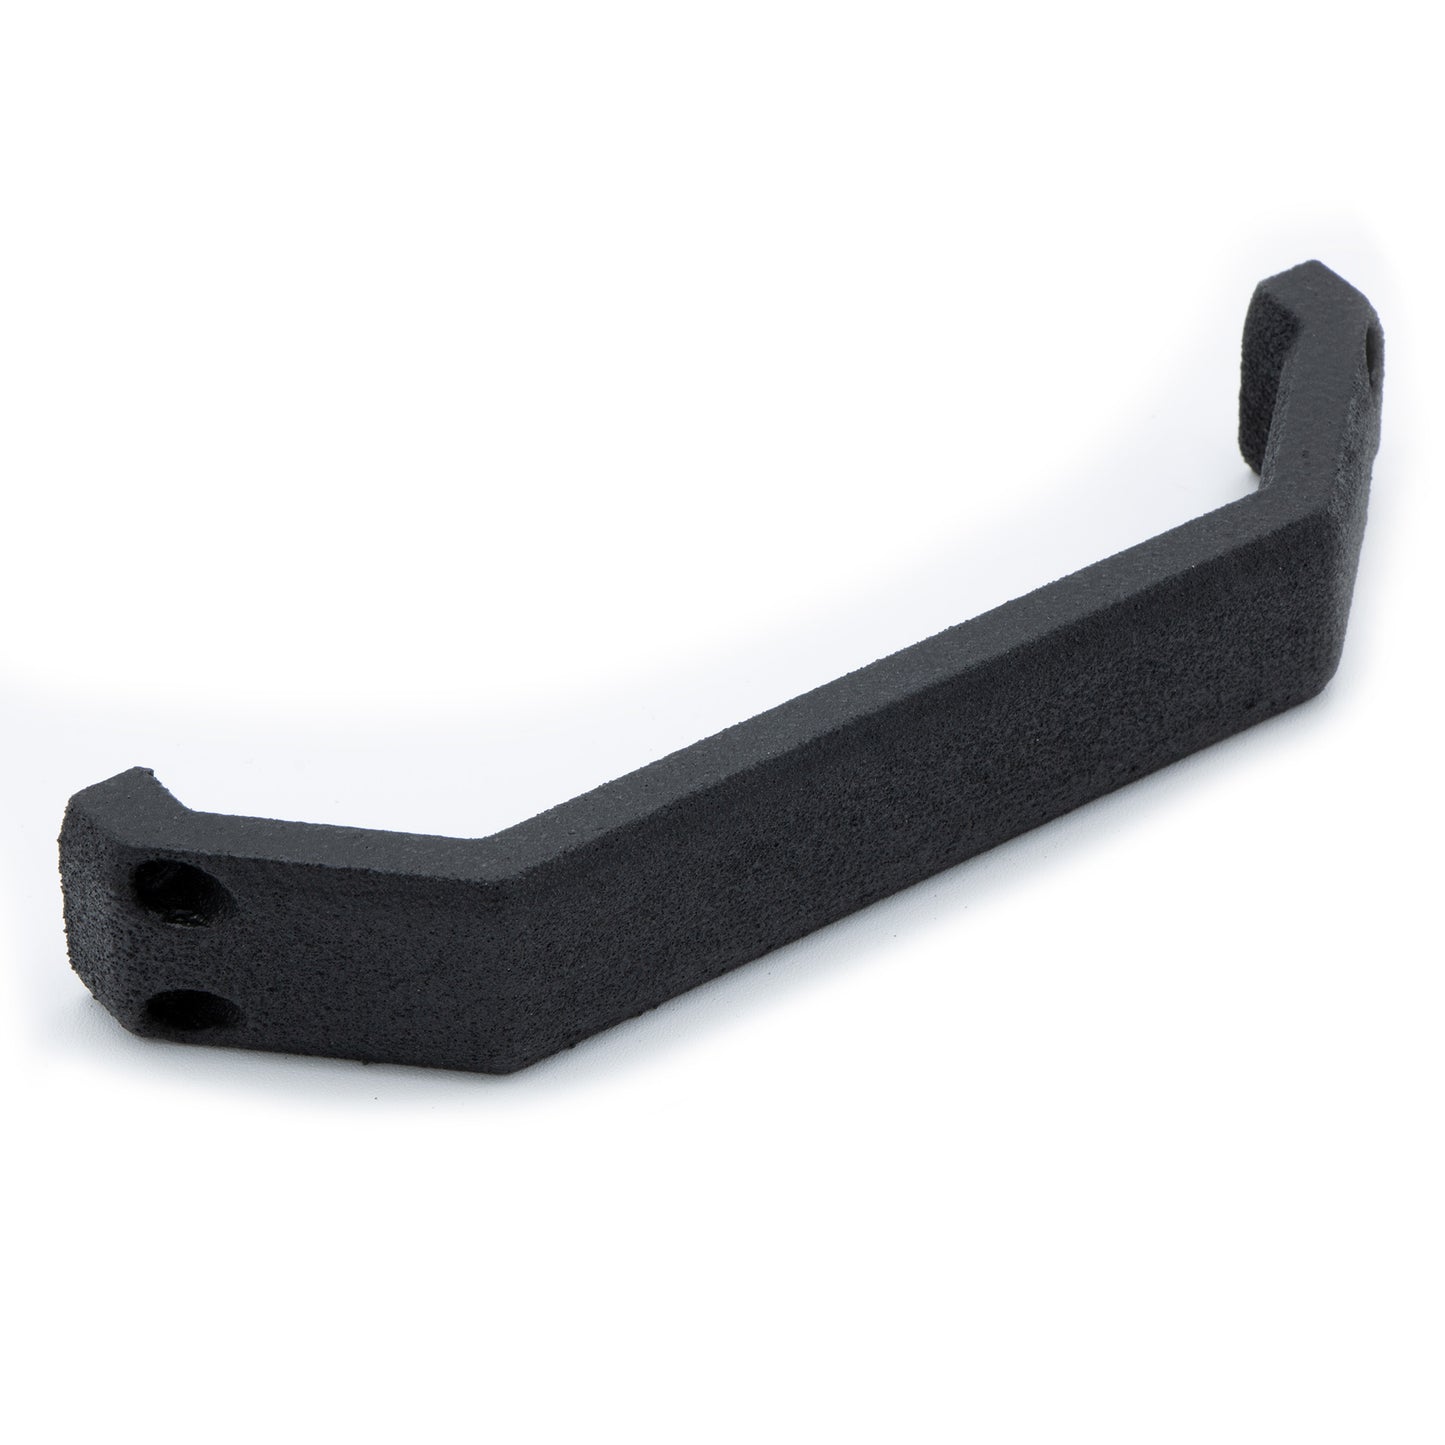 Handle Replacement - Fits All Marten & Mink Inspection Crawlers